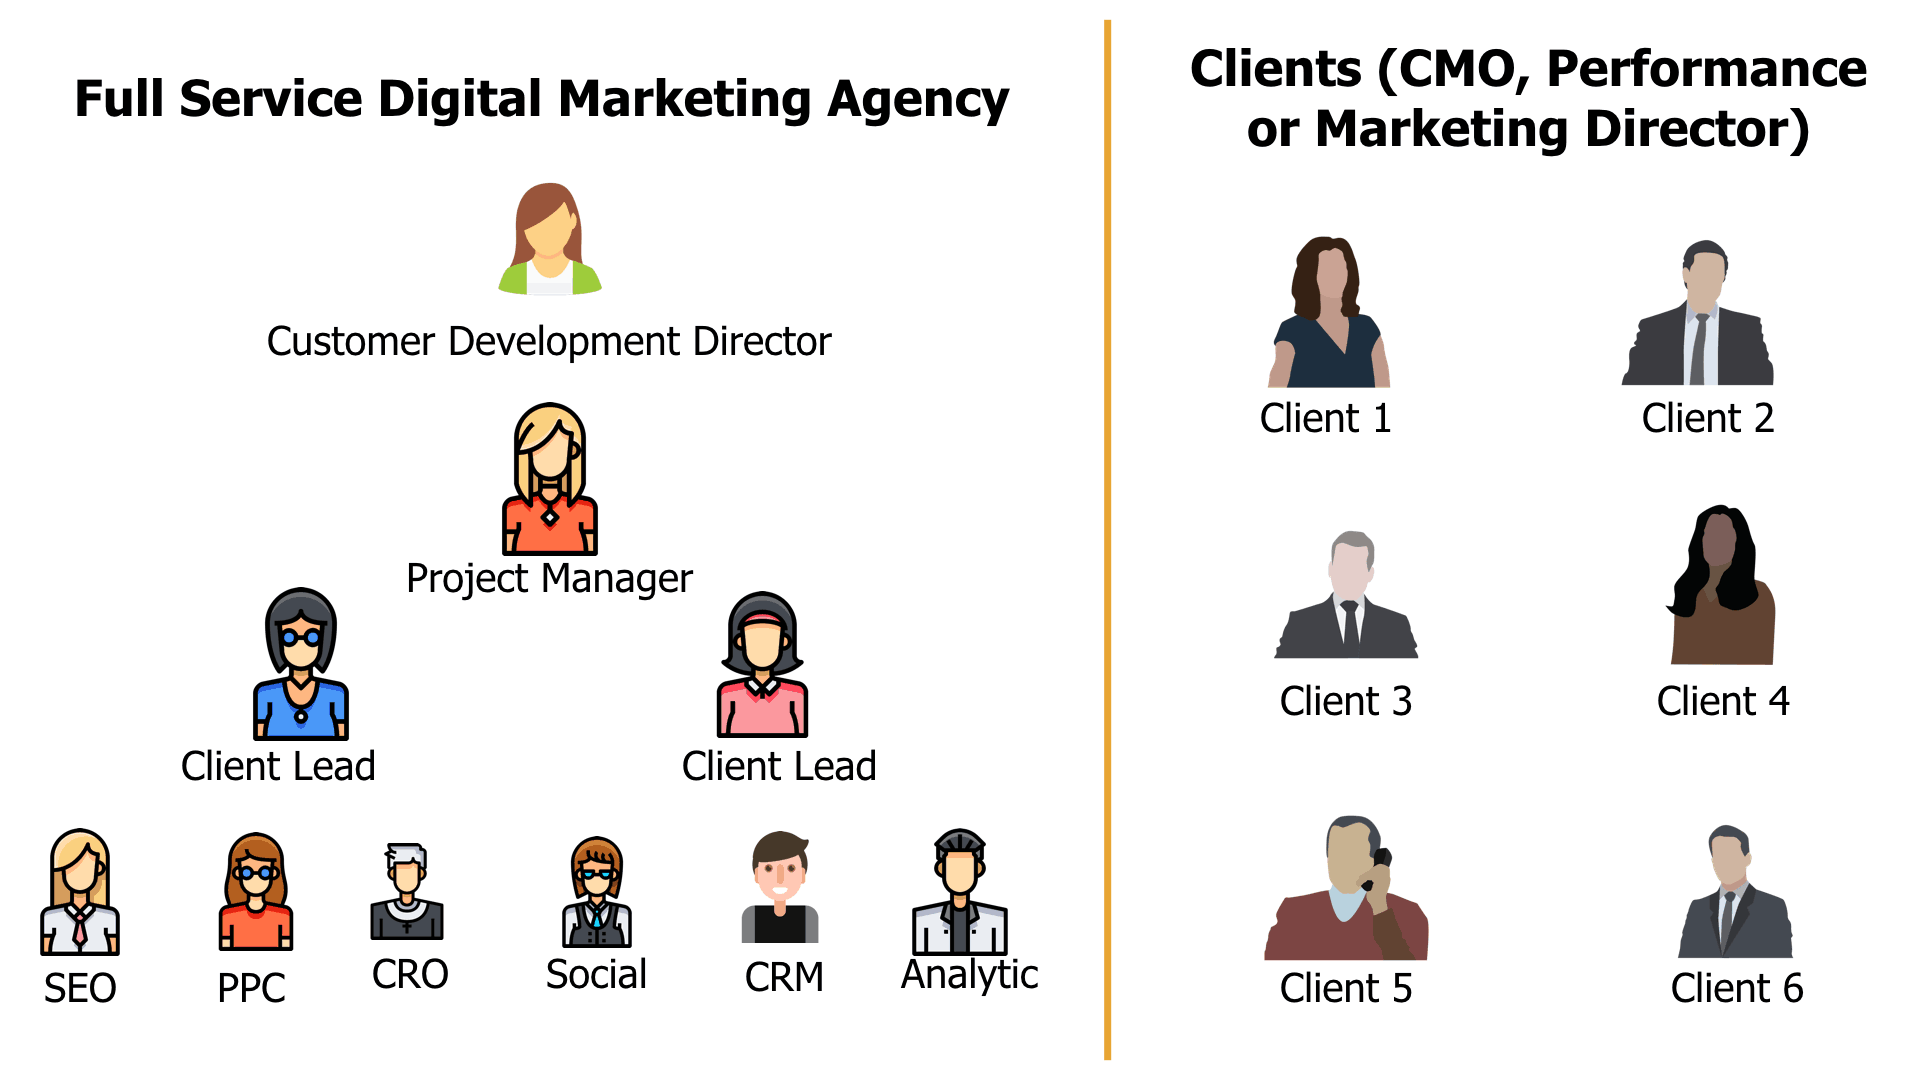 How to Select the Right Digital Marketing Agency to Support In-House Teams